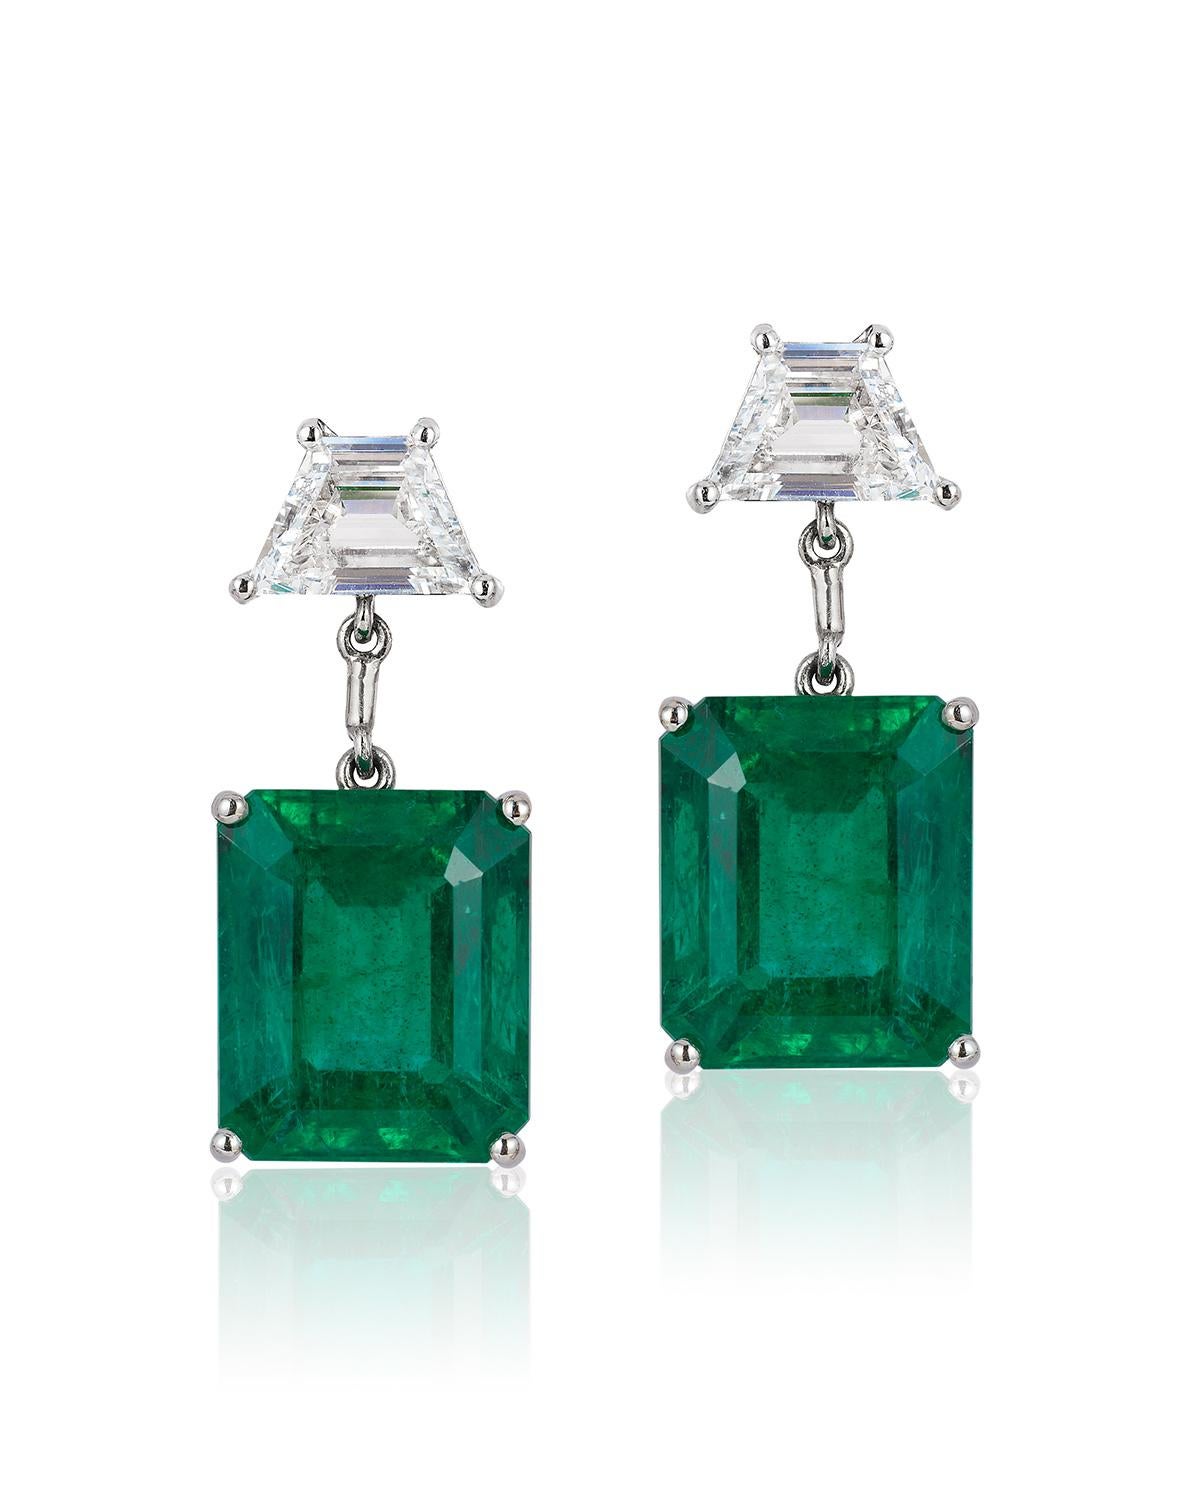 Emerald-Cut Emerald and Diamond Drop Earrings CDC Certified Platinum Andreoli

Classic and extraordinary style is highlighted in these emerald and diamond drop earrings. Breathtaking pair of emerald-cut emerald with two step cut trapezoid cut